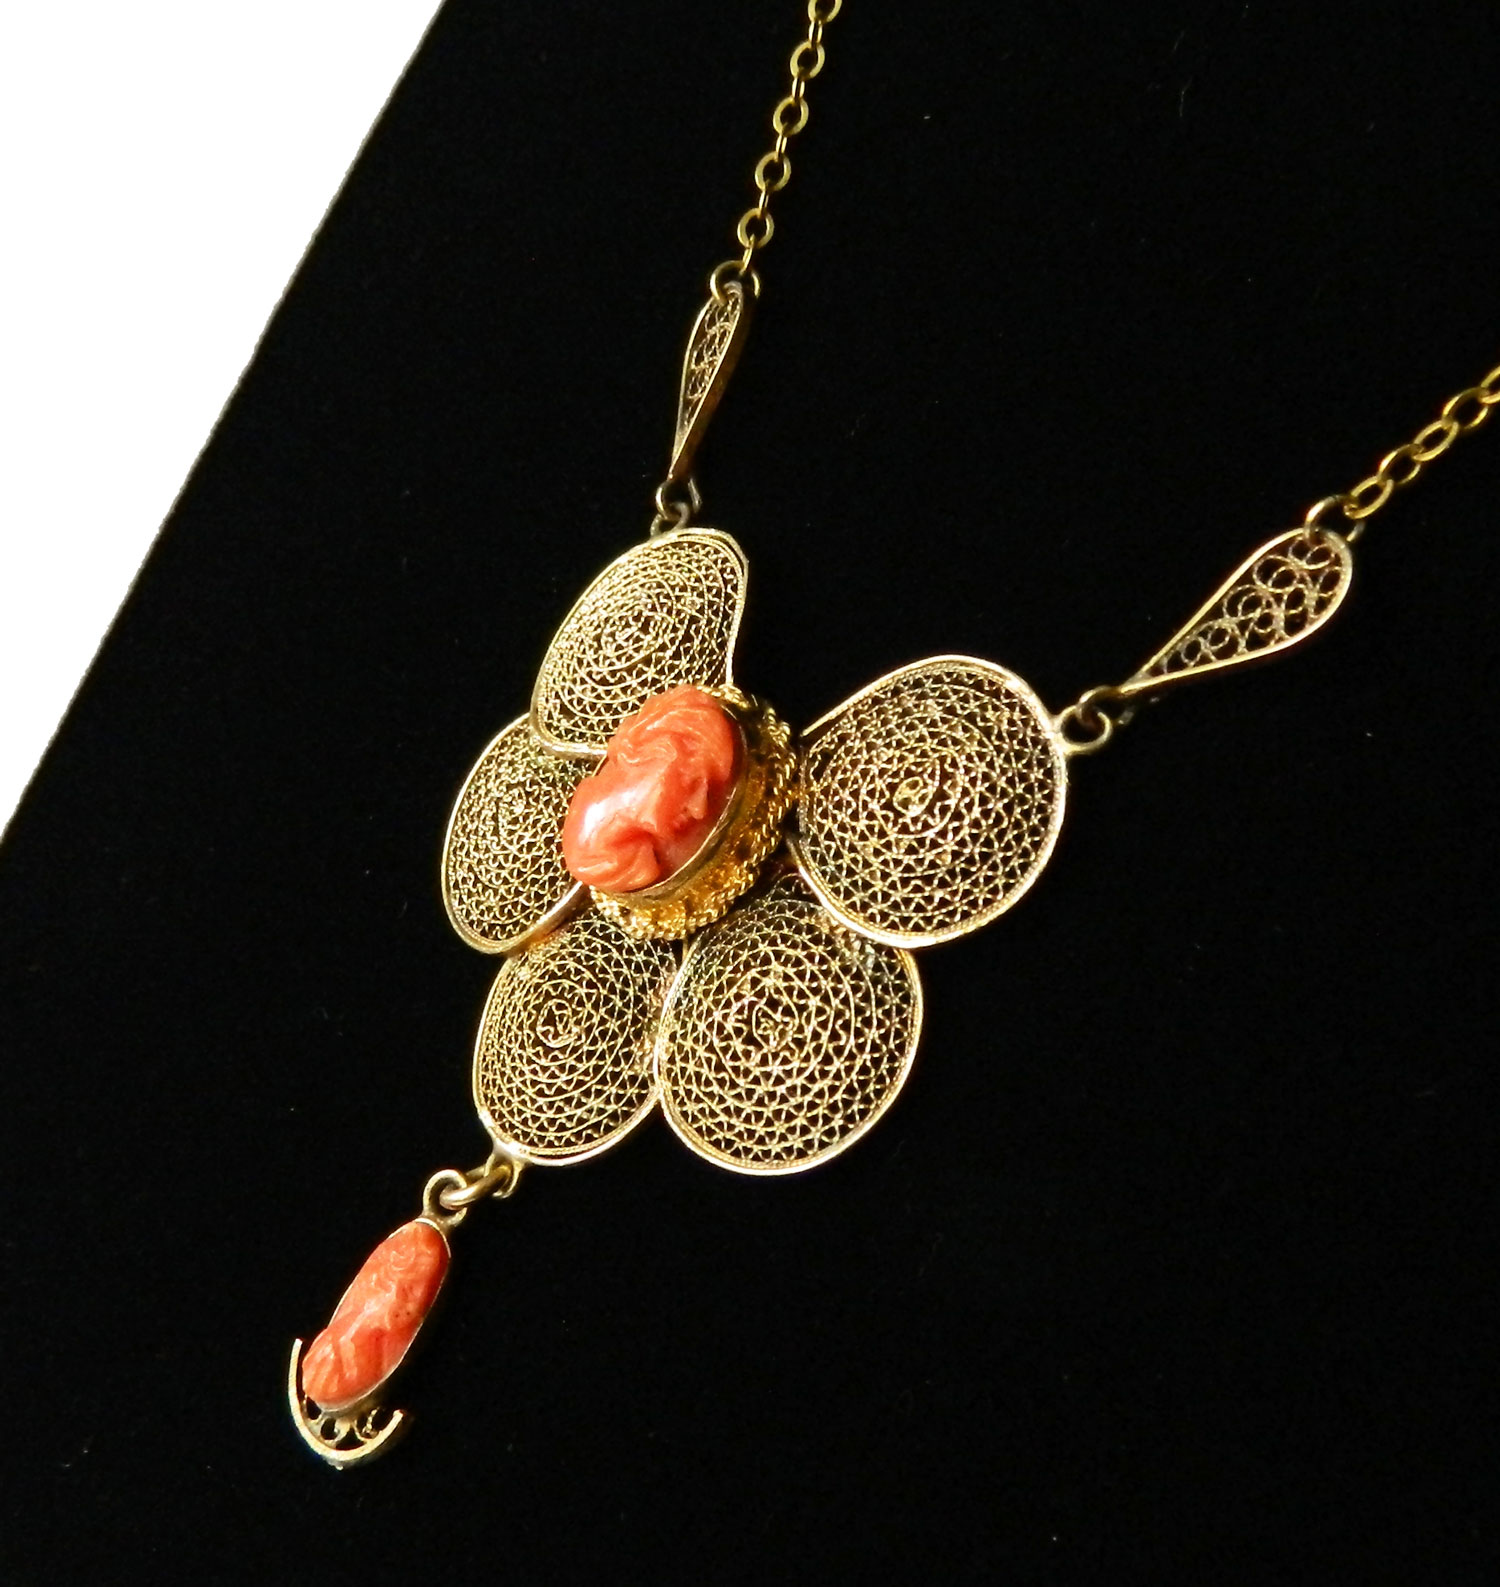 Sterling silver coral cameo necklace